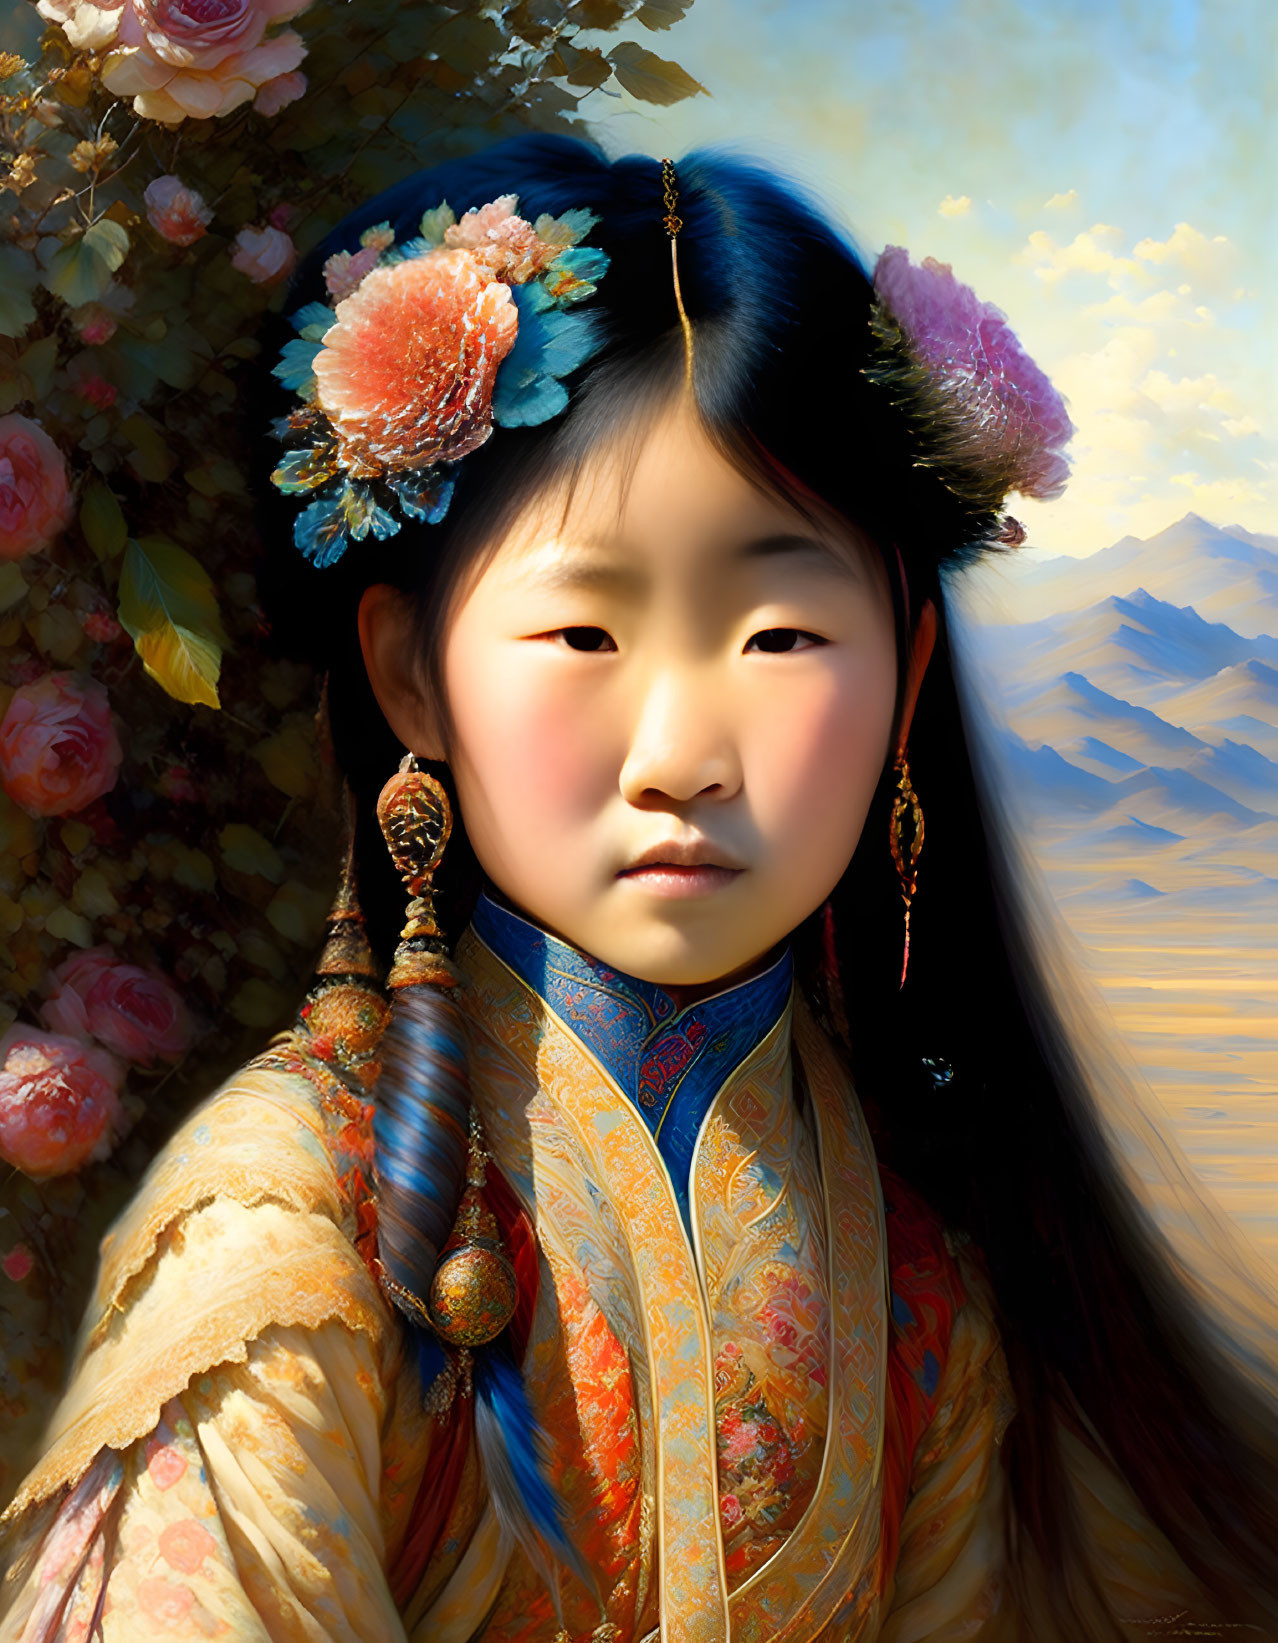 Portrait of girl with long black hair in traditional attire against floral mountain backdrop